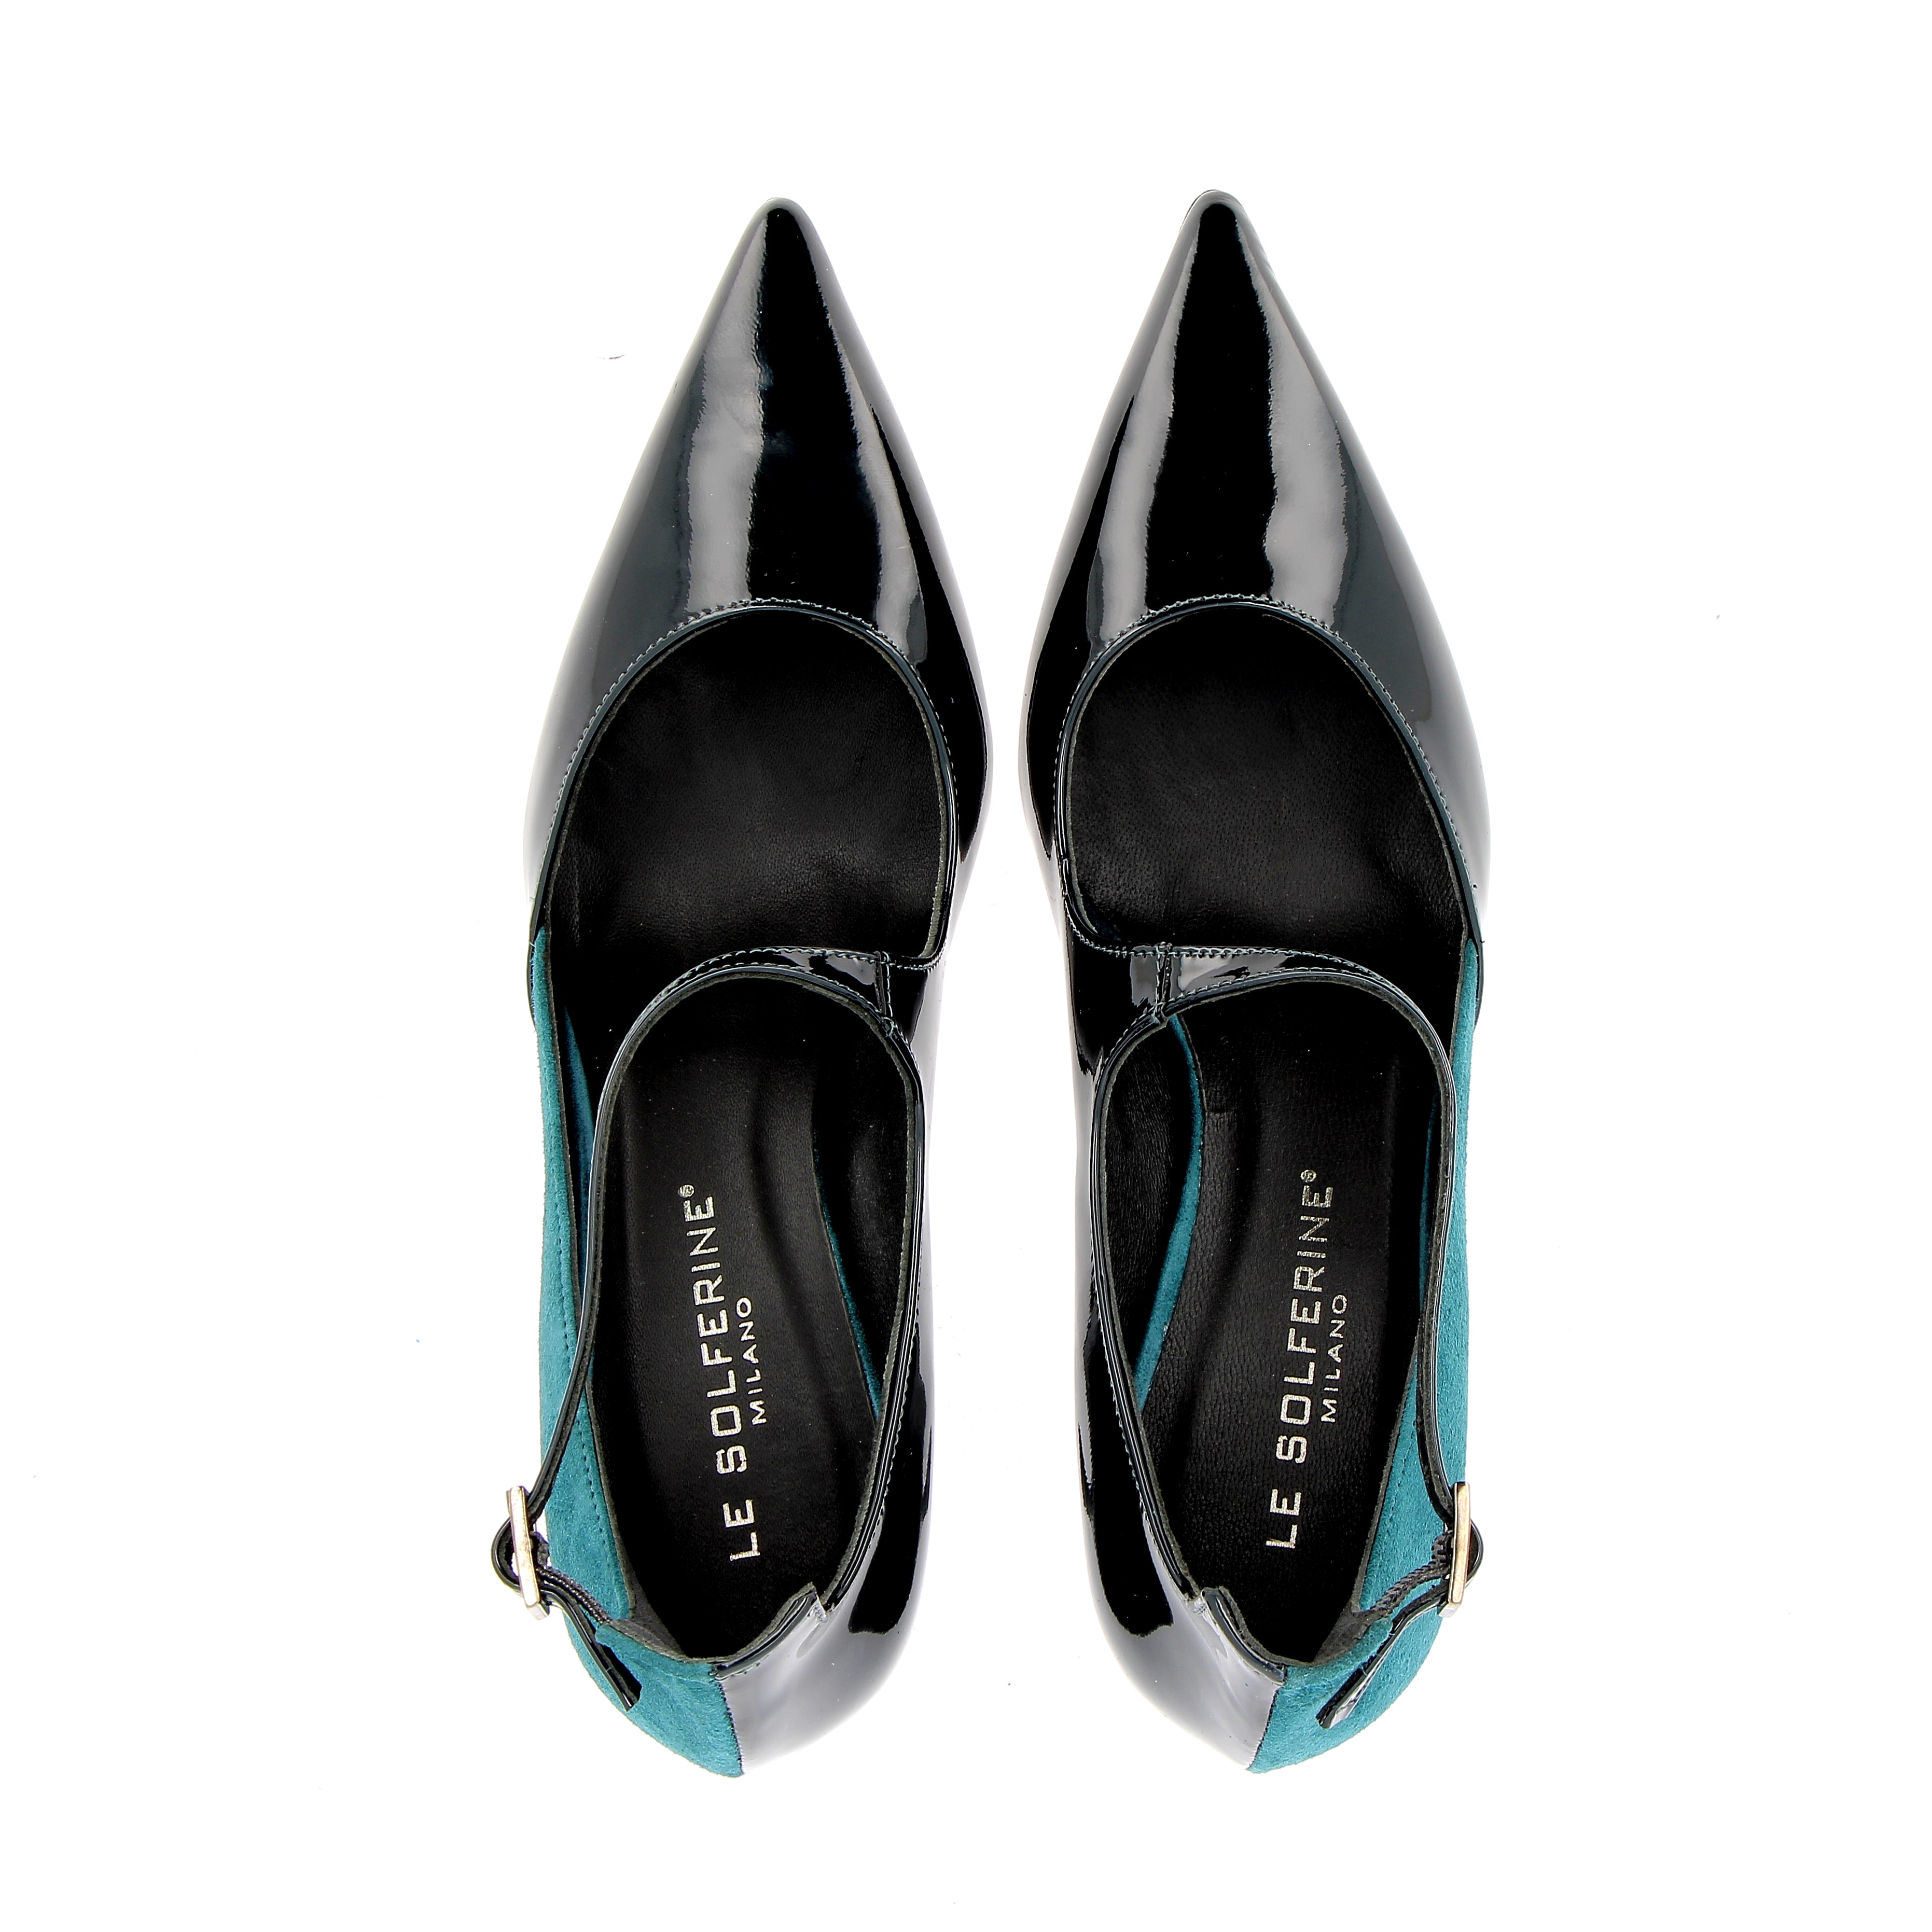 Petrol patent leather and teal suede pumps